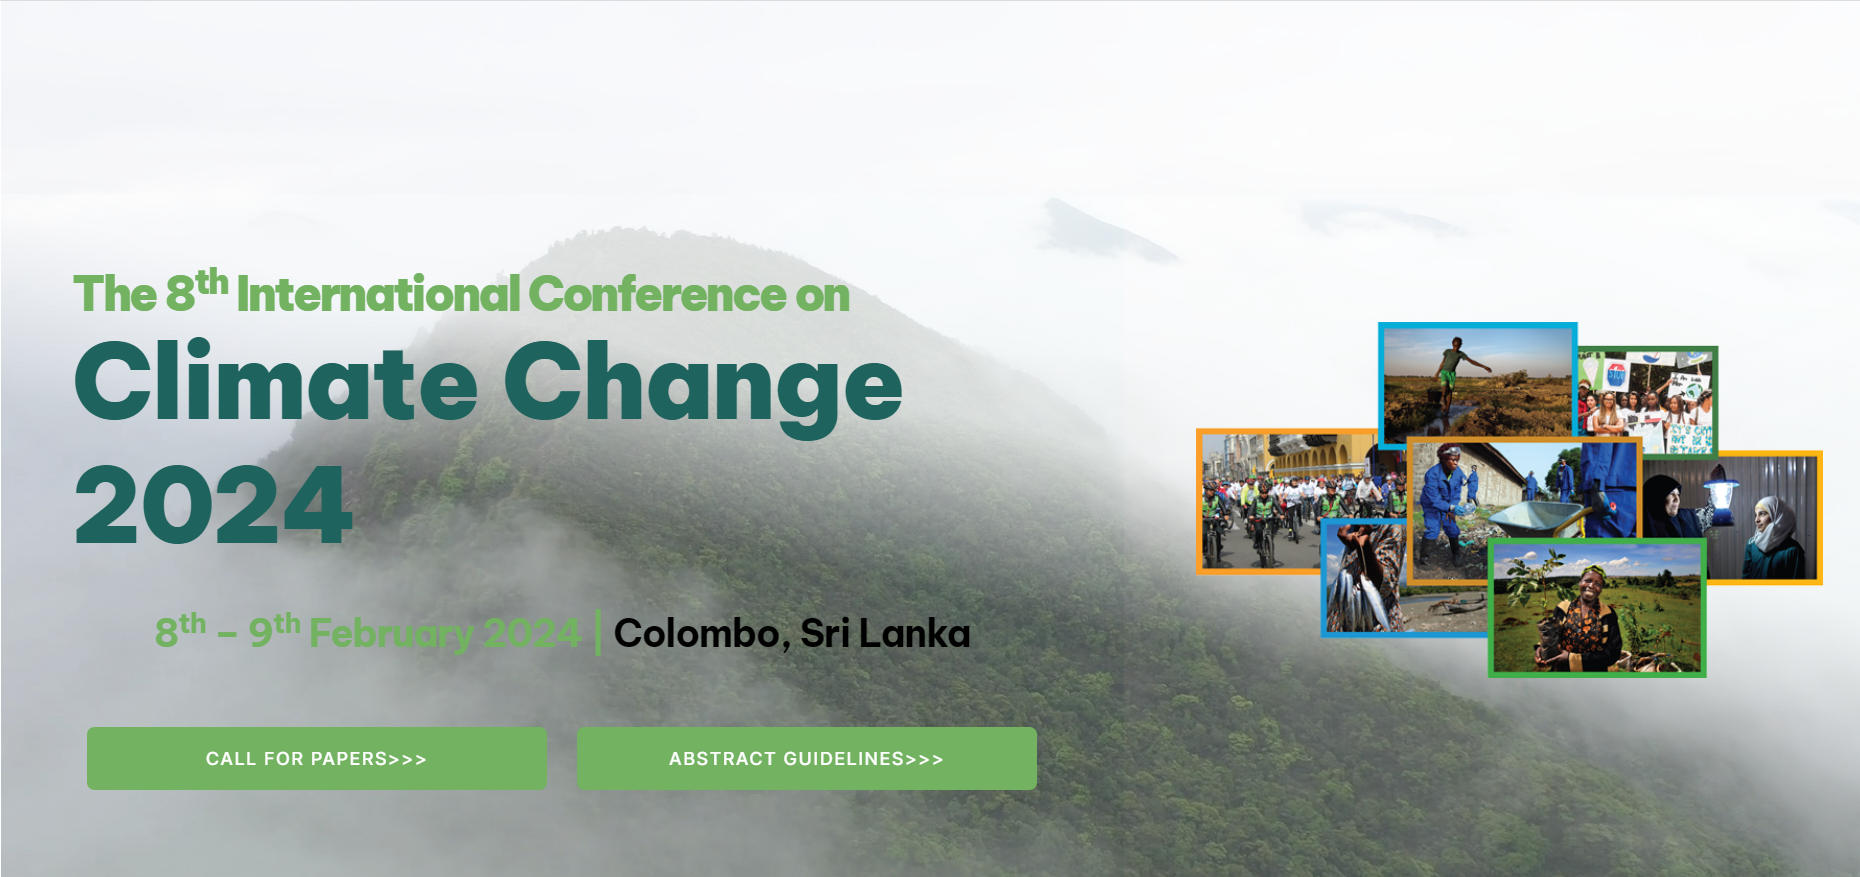 The 8th International Conference on Climate Change 2024 - (ICCC 2024), Western Province, Colombo, Sri Lanka